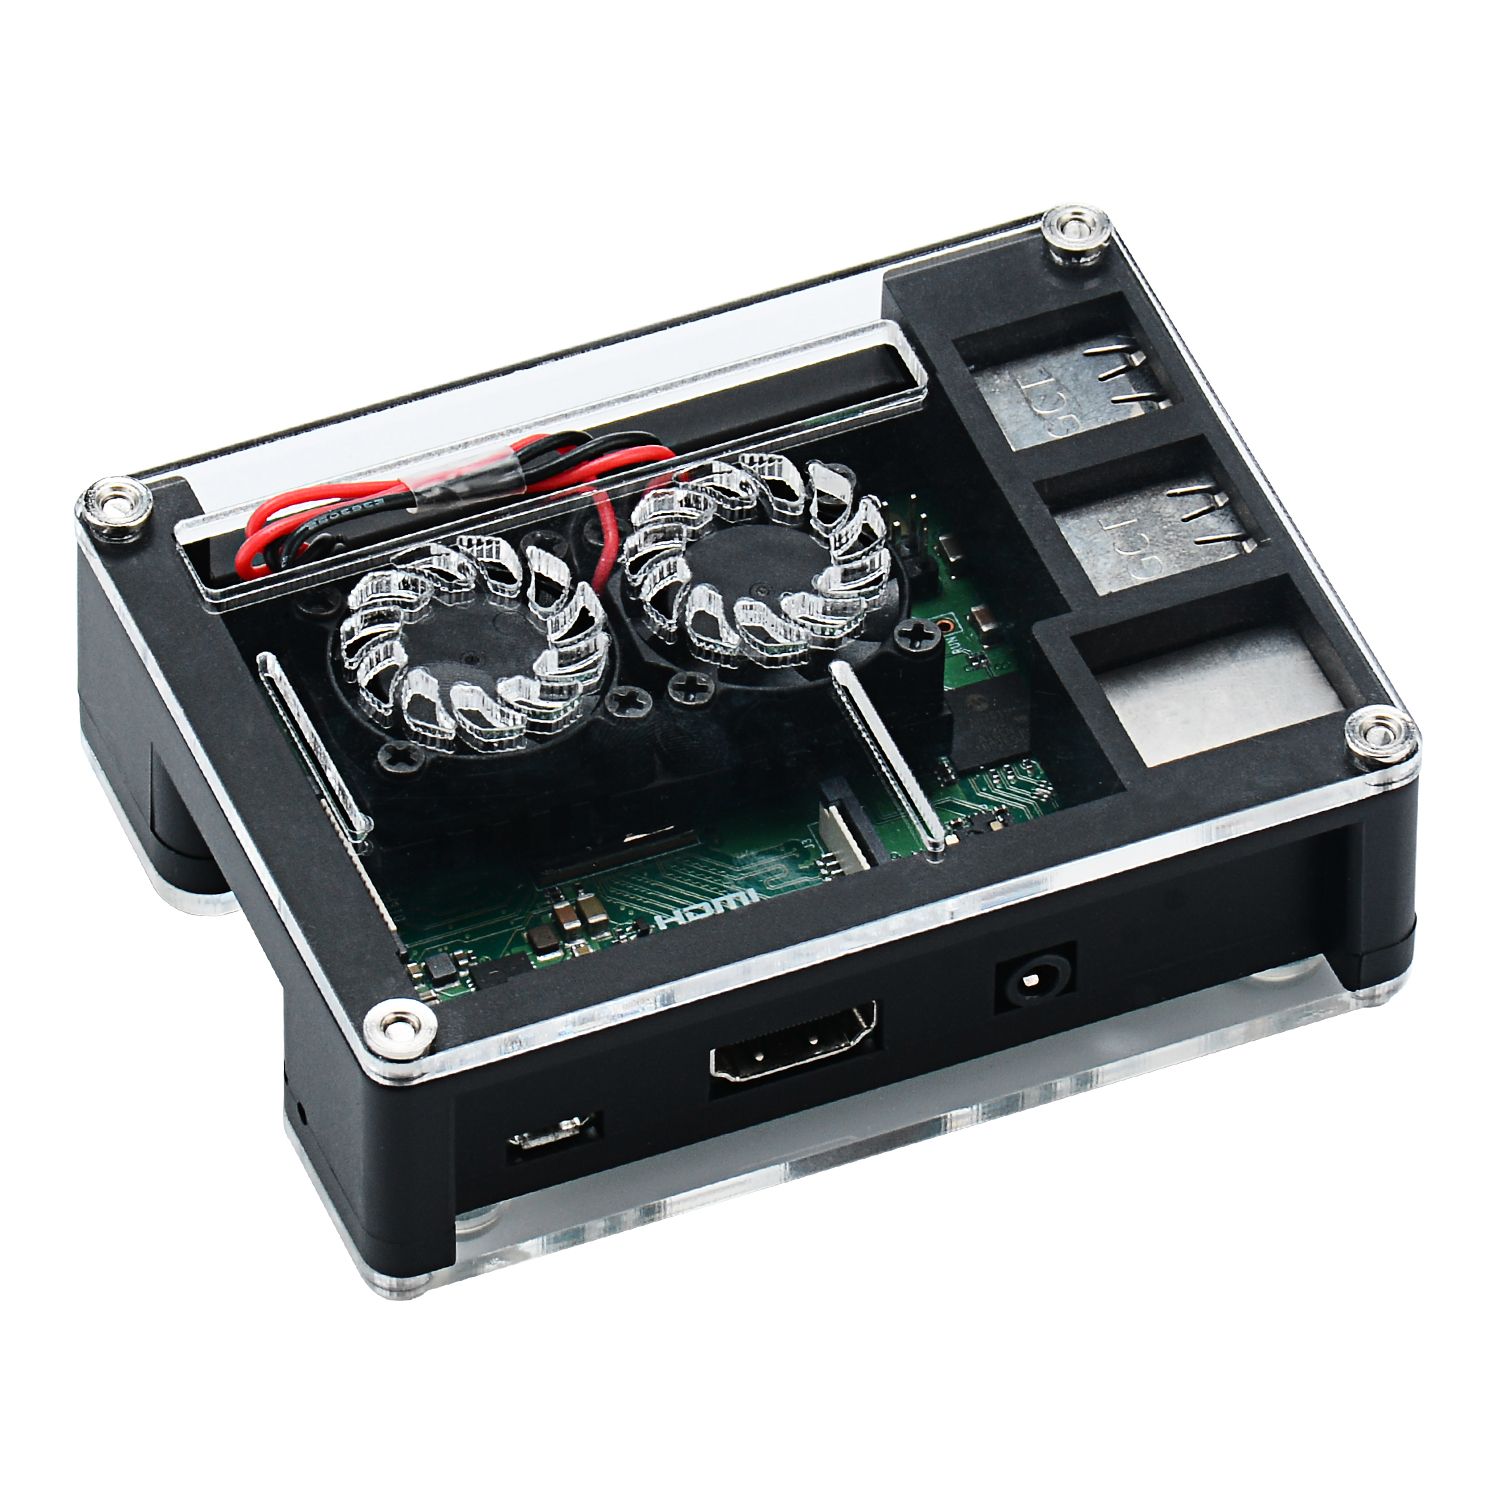 Black-Acrylic-Case-Support-Dual-Cooling-Fans-For-Raspberry-Pi-3B-Board-1411938